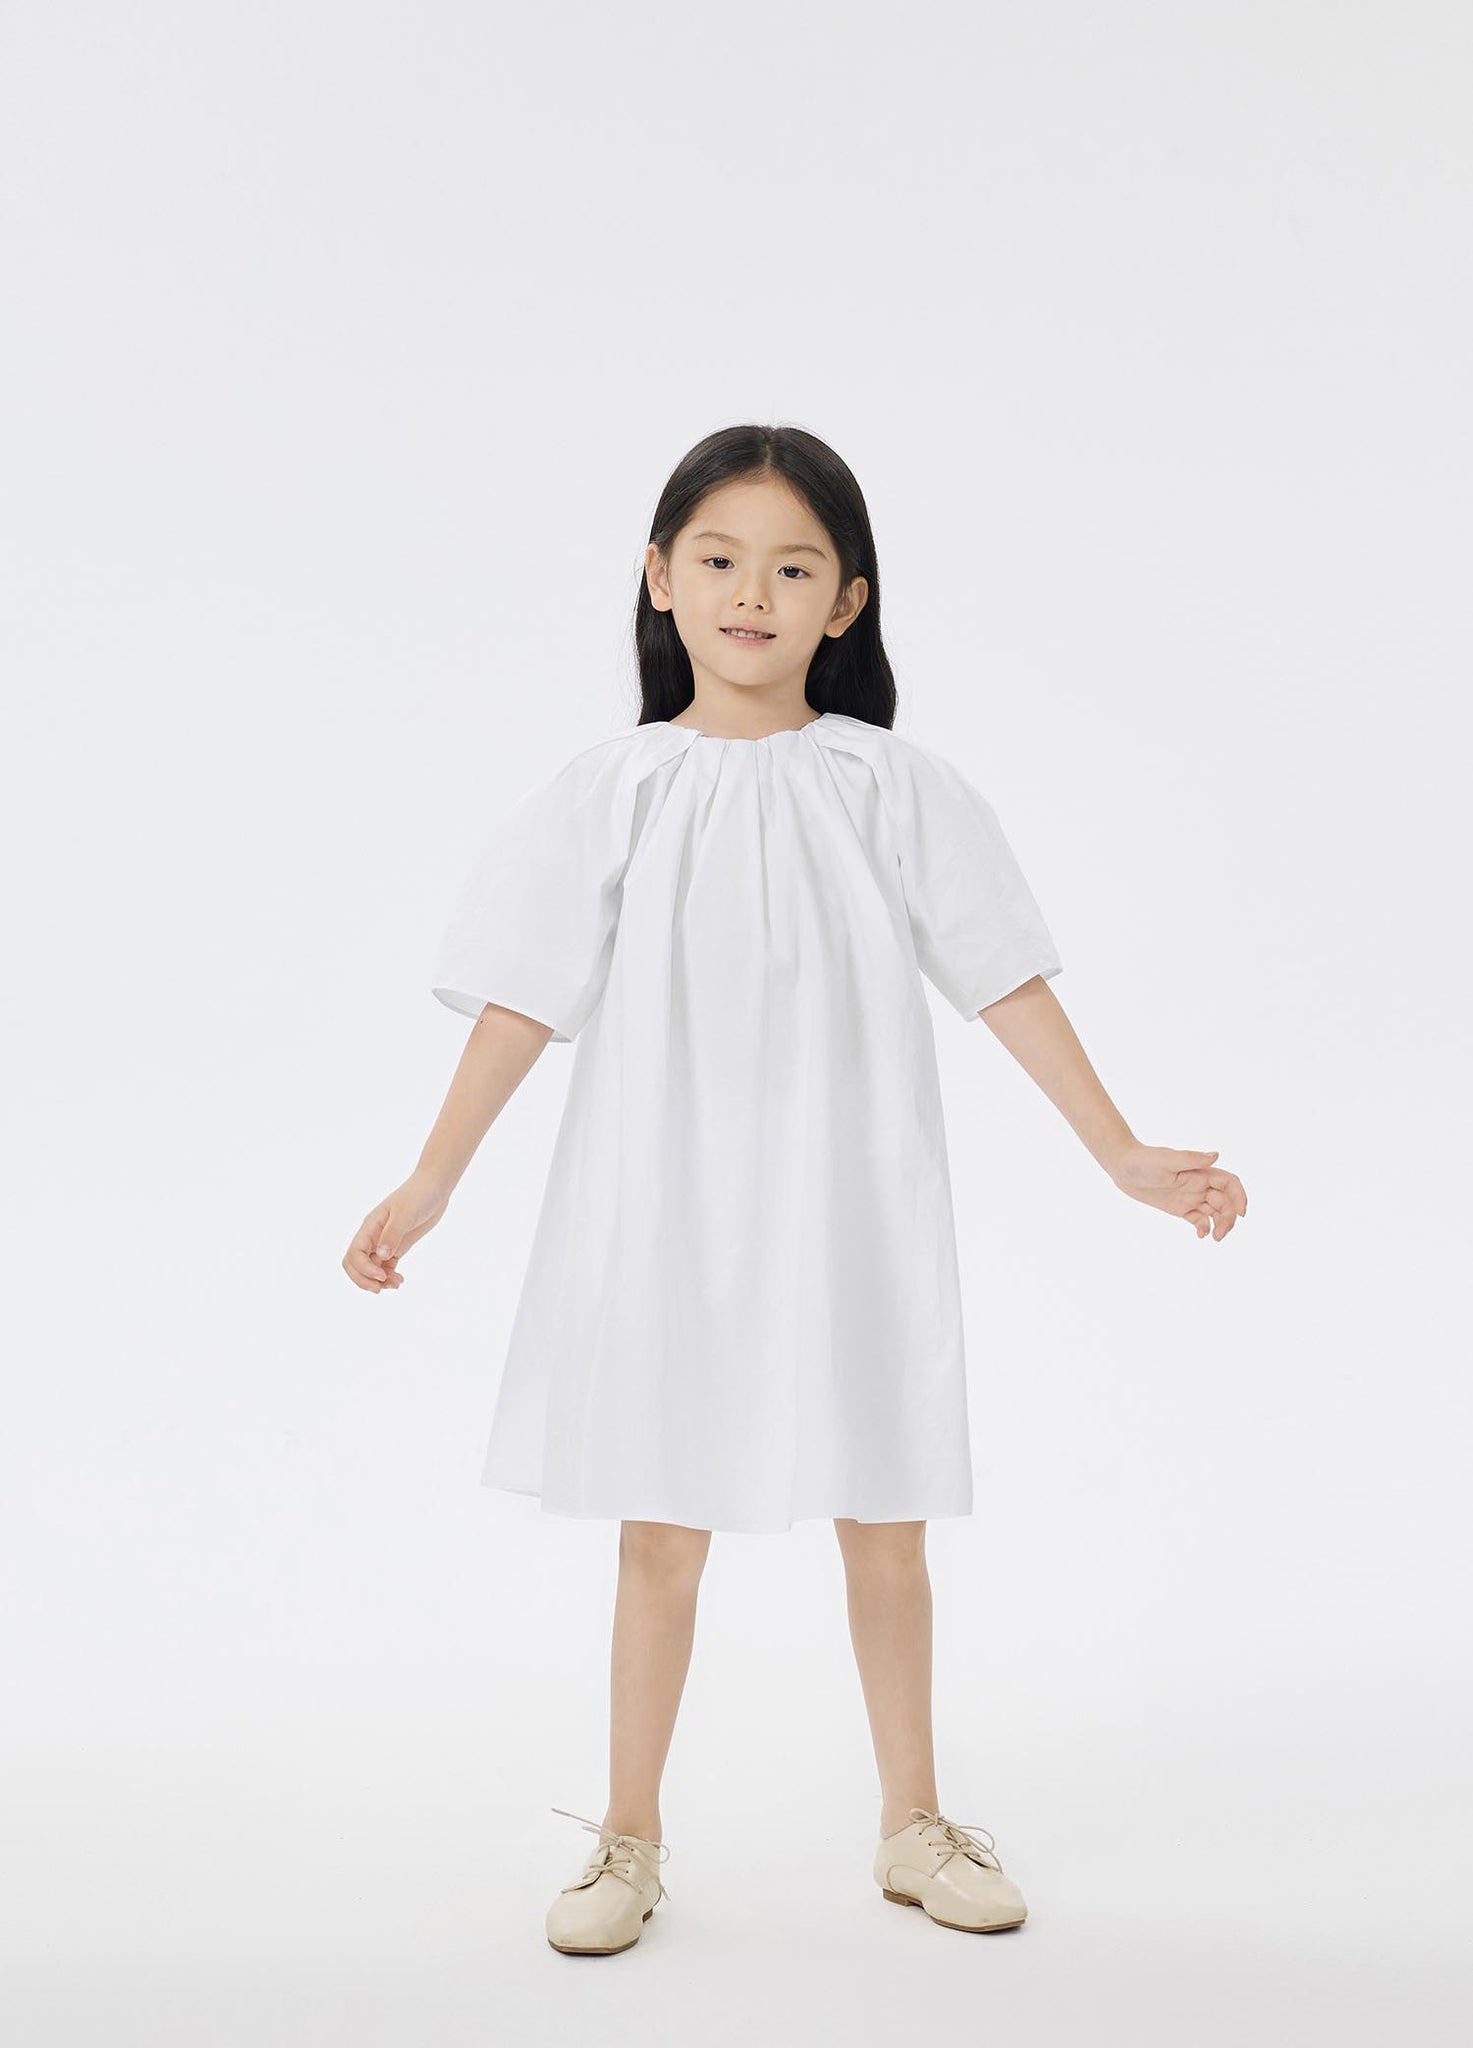 Dresses / jnby by JNBY Loose Fit Short Sleeve Dress (100% Cotton)